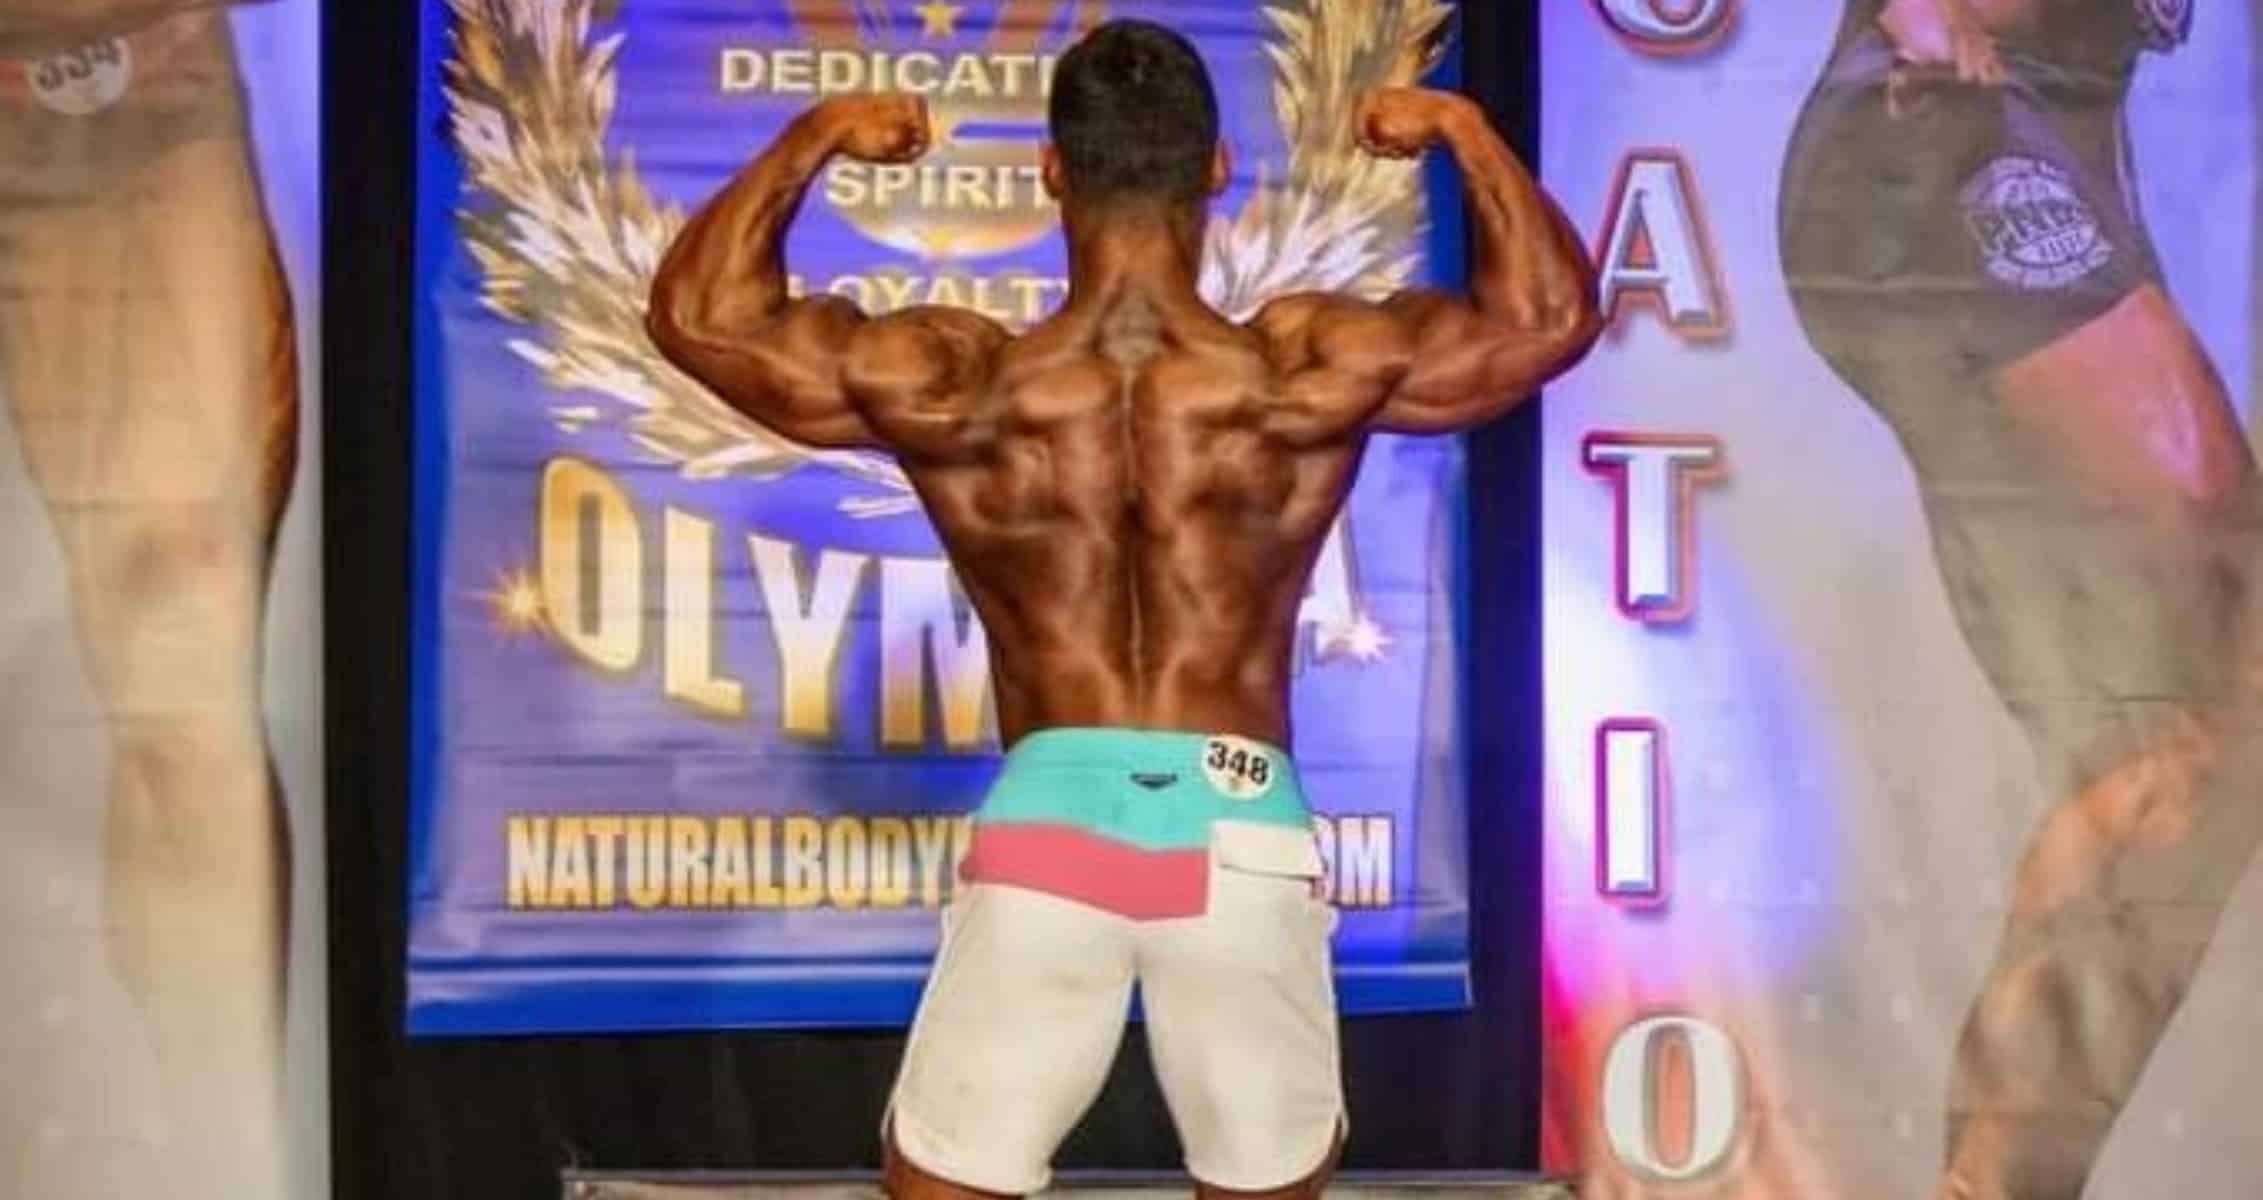 Some backstage footage of my first ever physique/ bodybuilding competi... |  TikTok